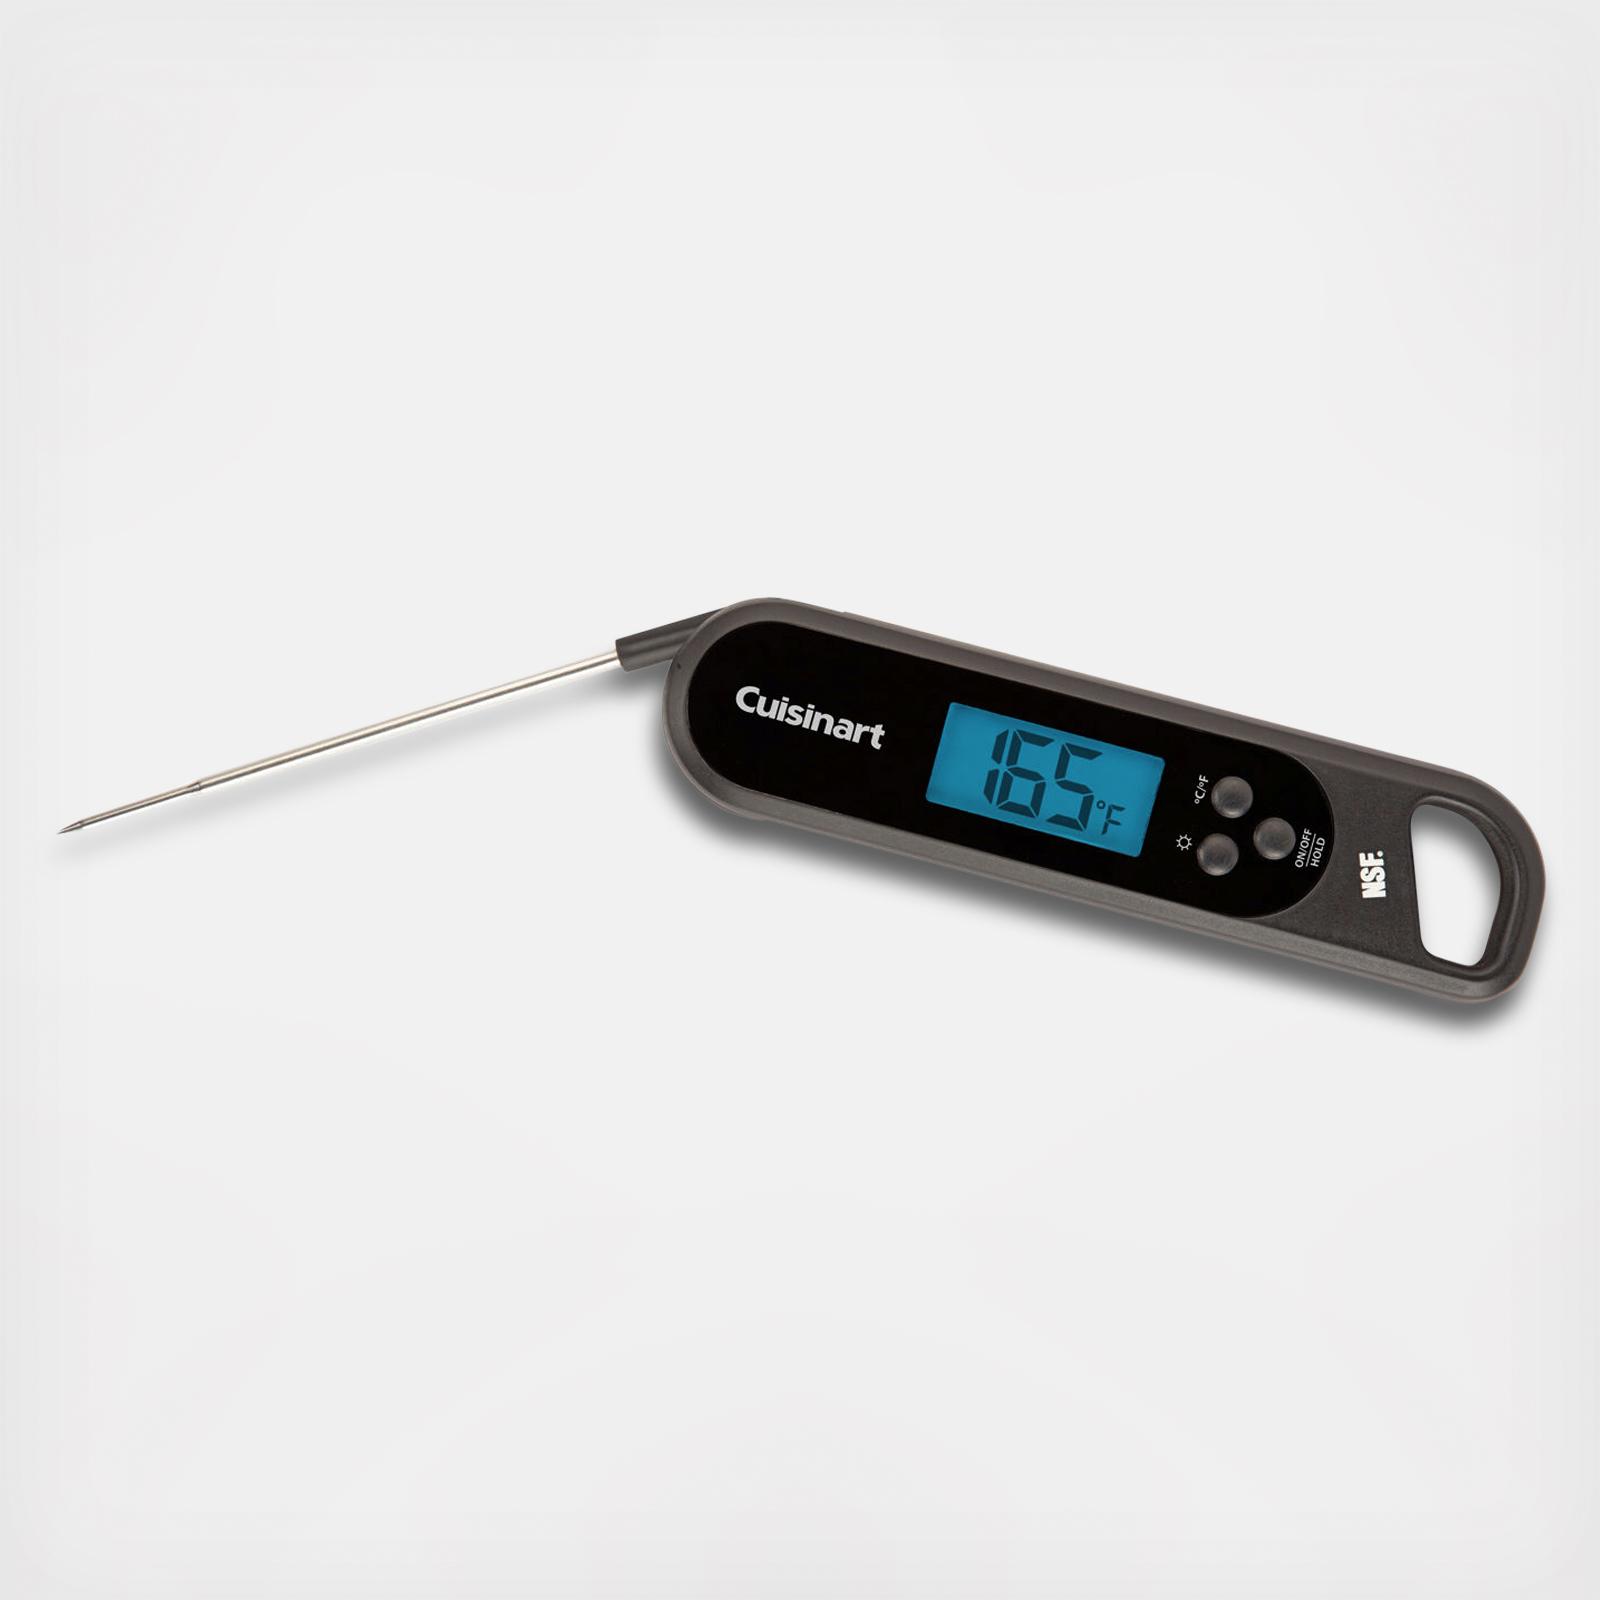 Cuisinart Bluetooth Easy Connect Thermometer with 2 Meat Probes